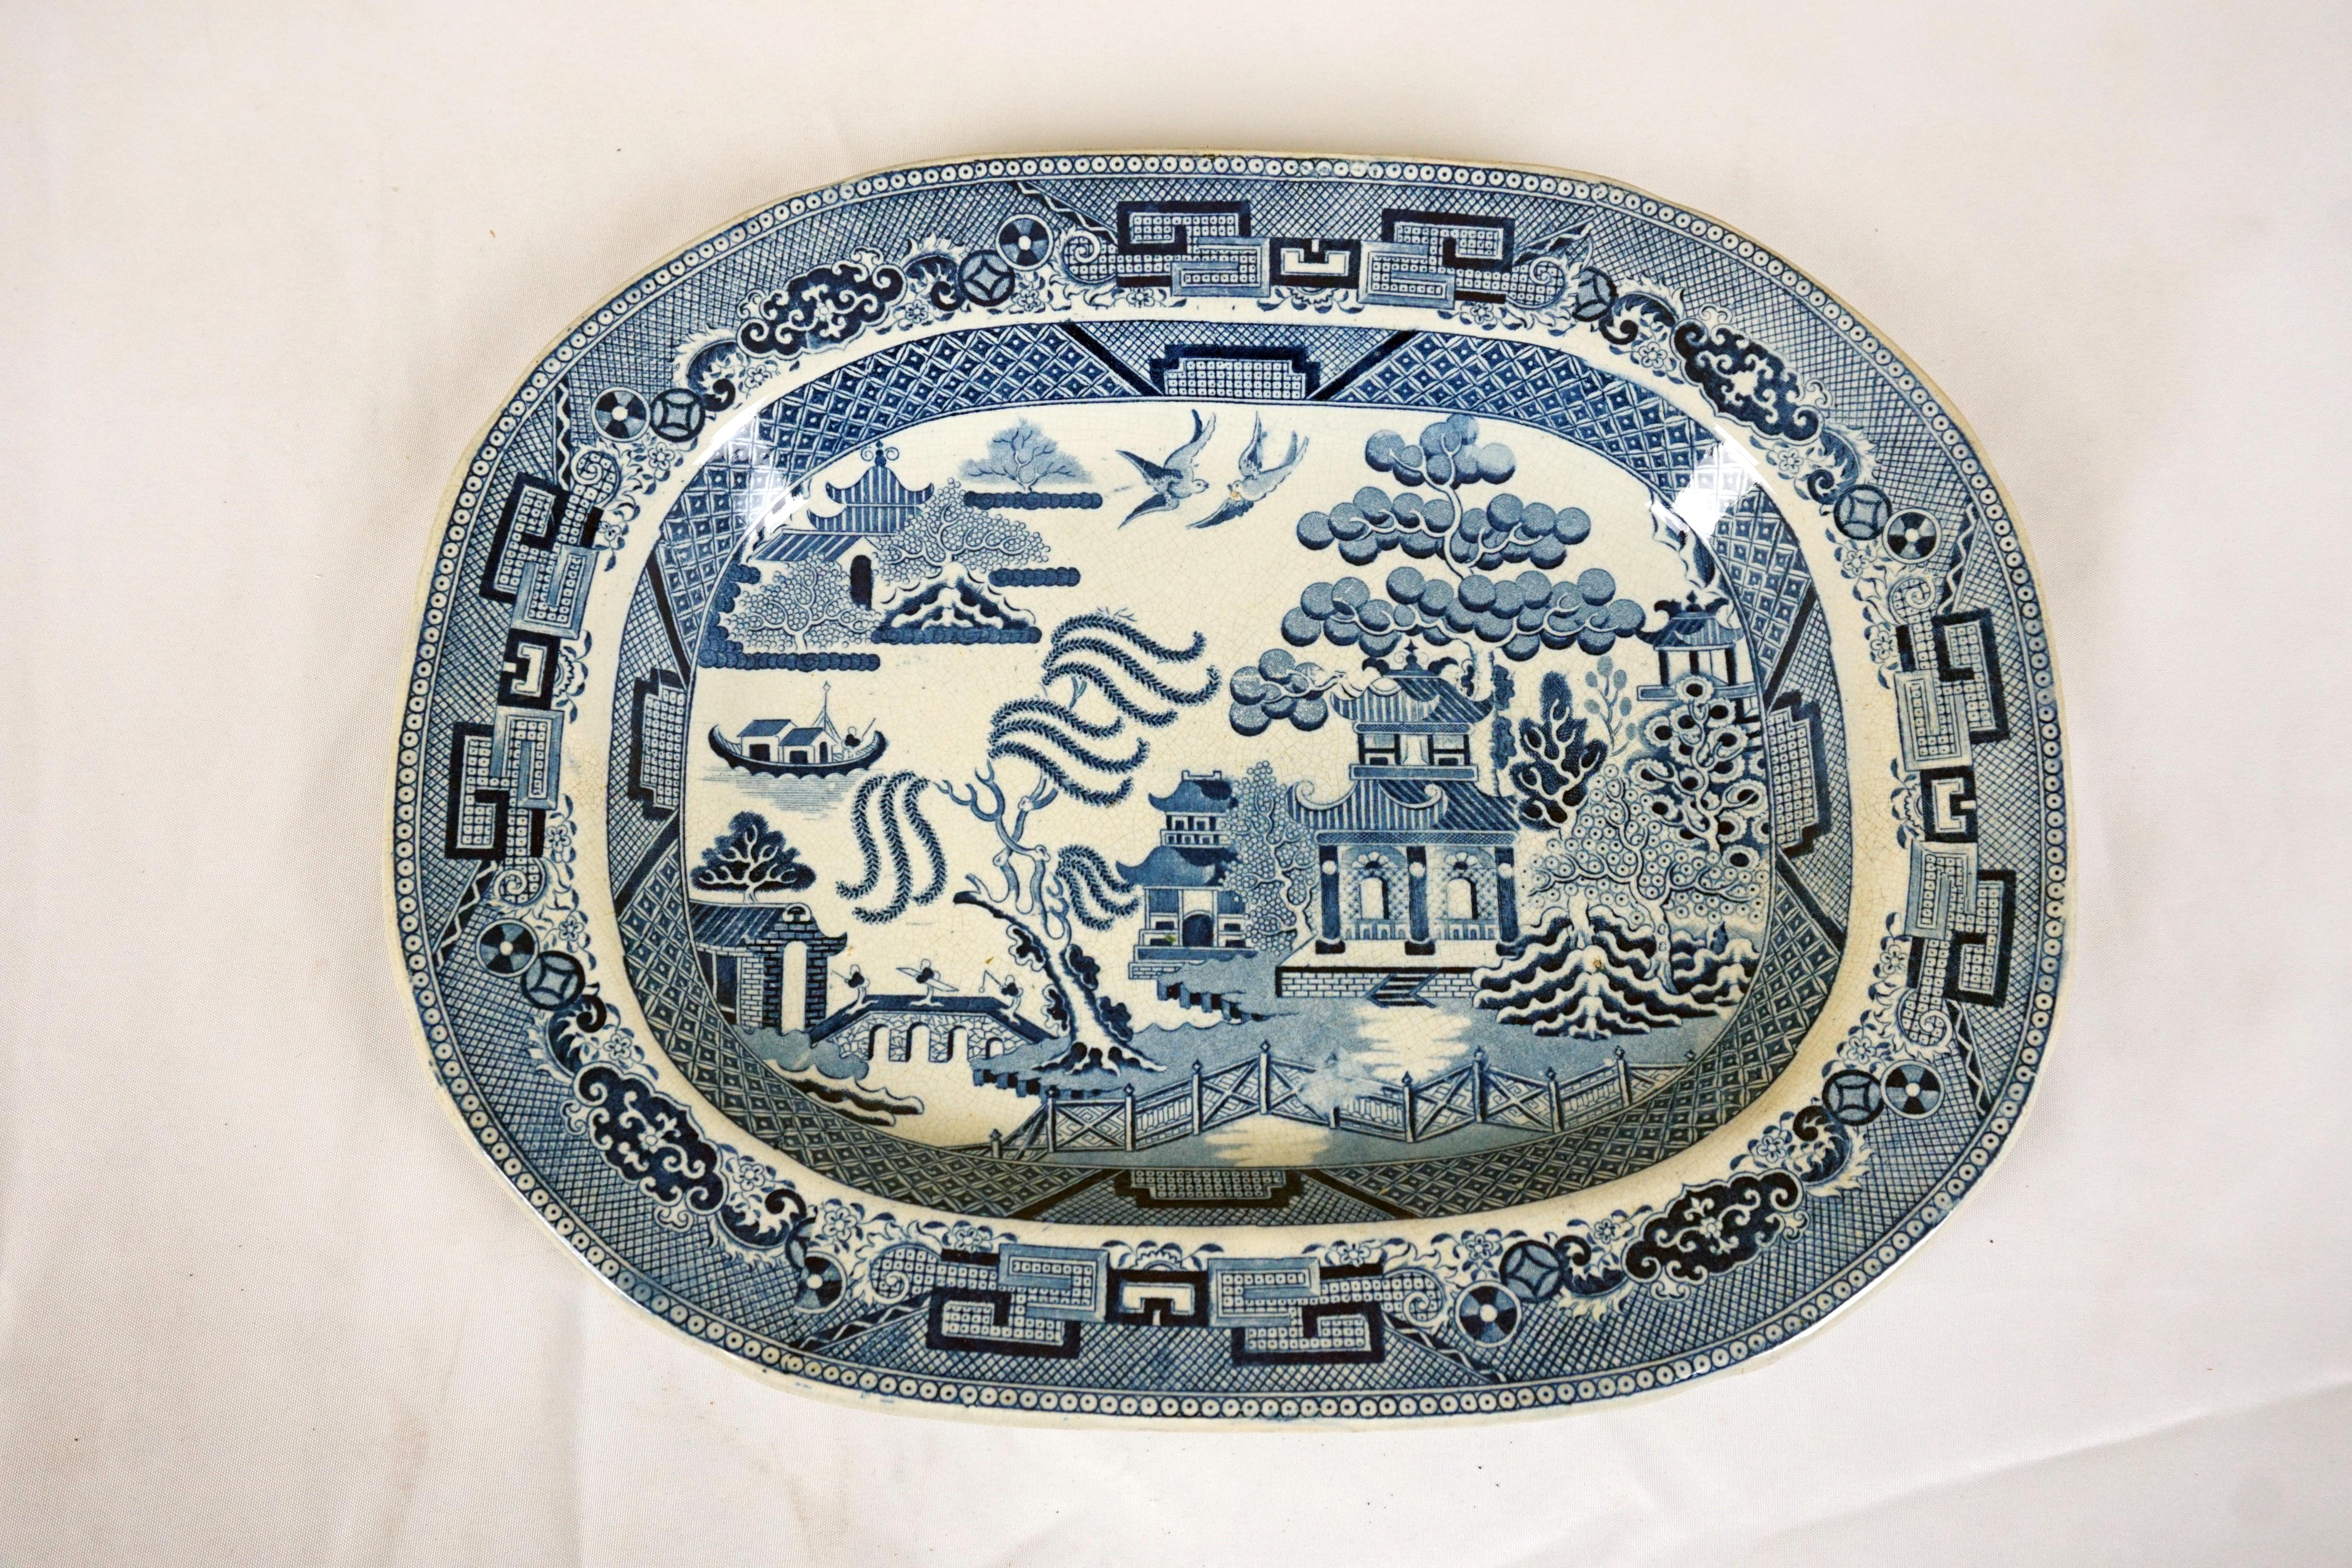 Mid 19th Century Pearlware Blue Willow Transfer platter, England 1840, H632

England 1890
Tree Has Well Shaped Impression Into The Body And Has A Blue And White Pattern 
Has A Blue And White Willow Pattern
